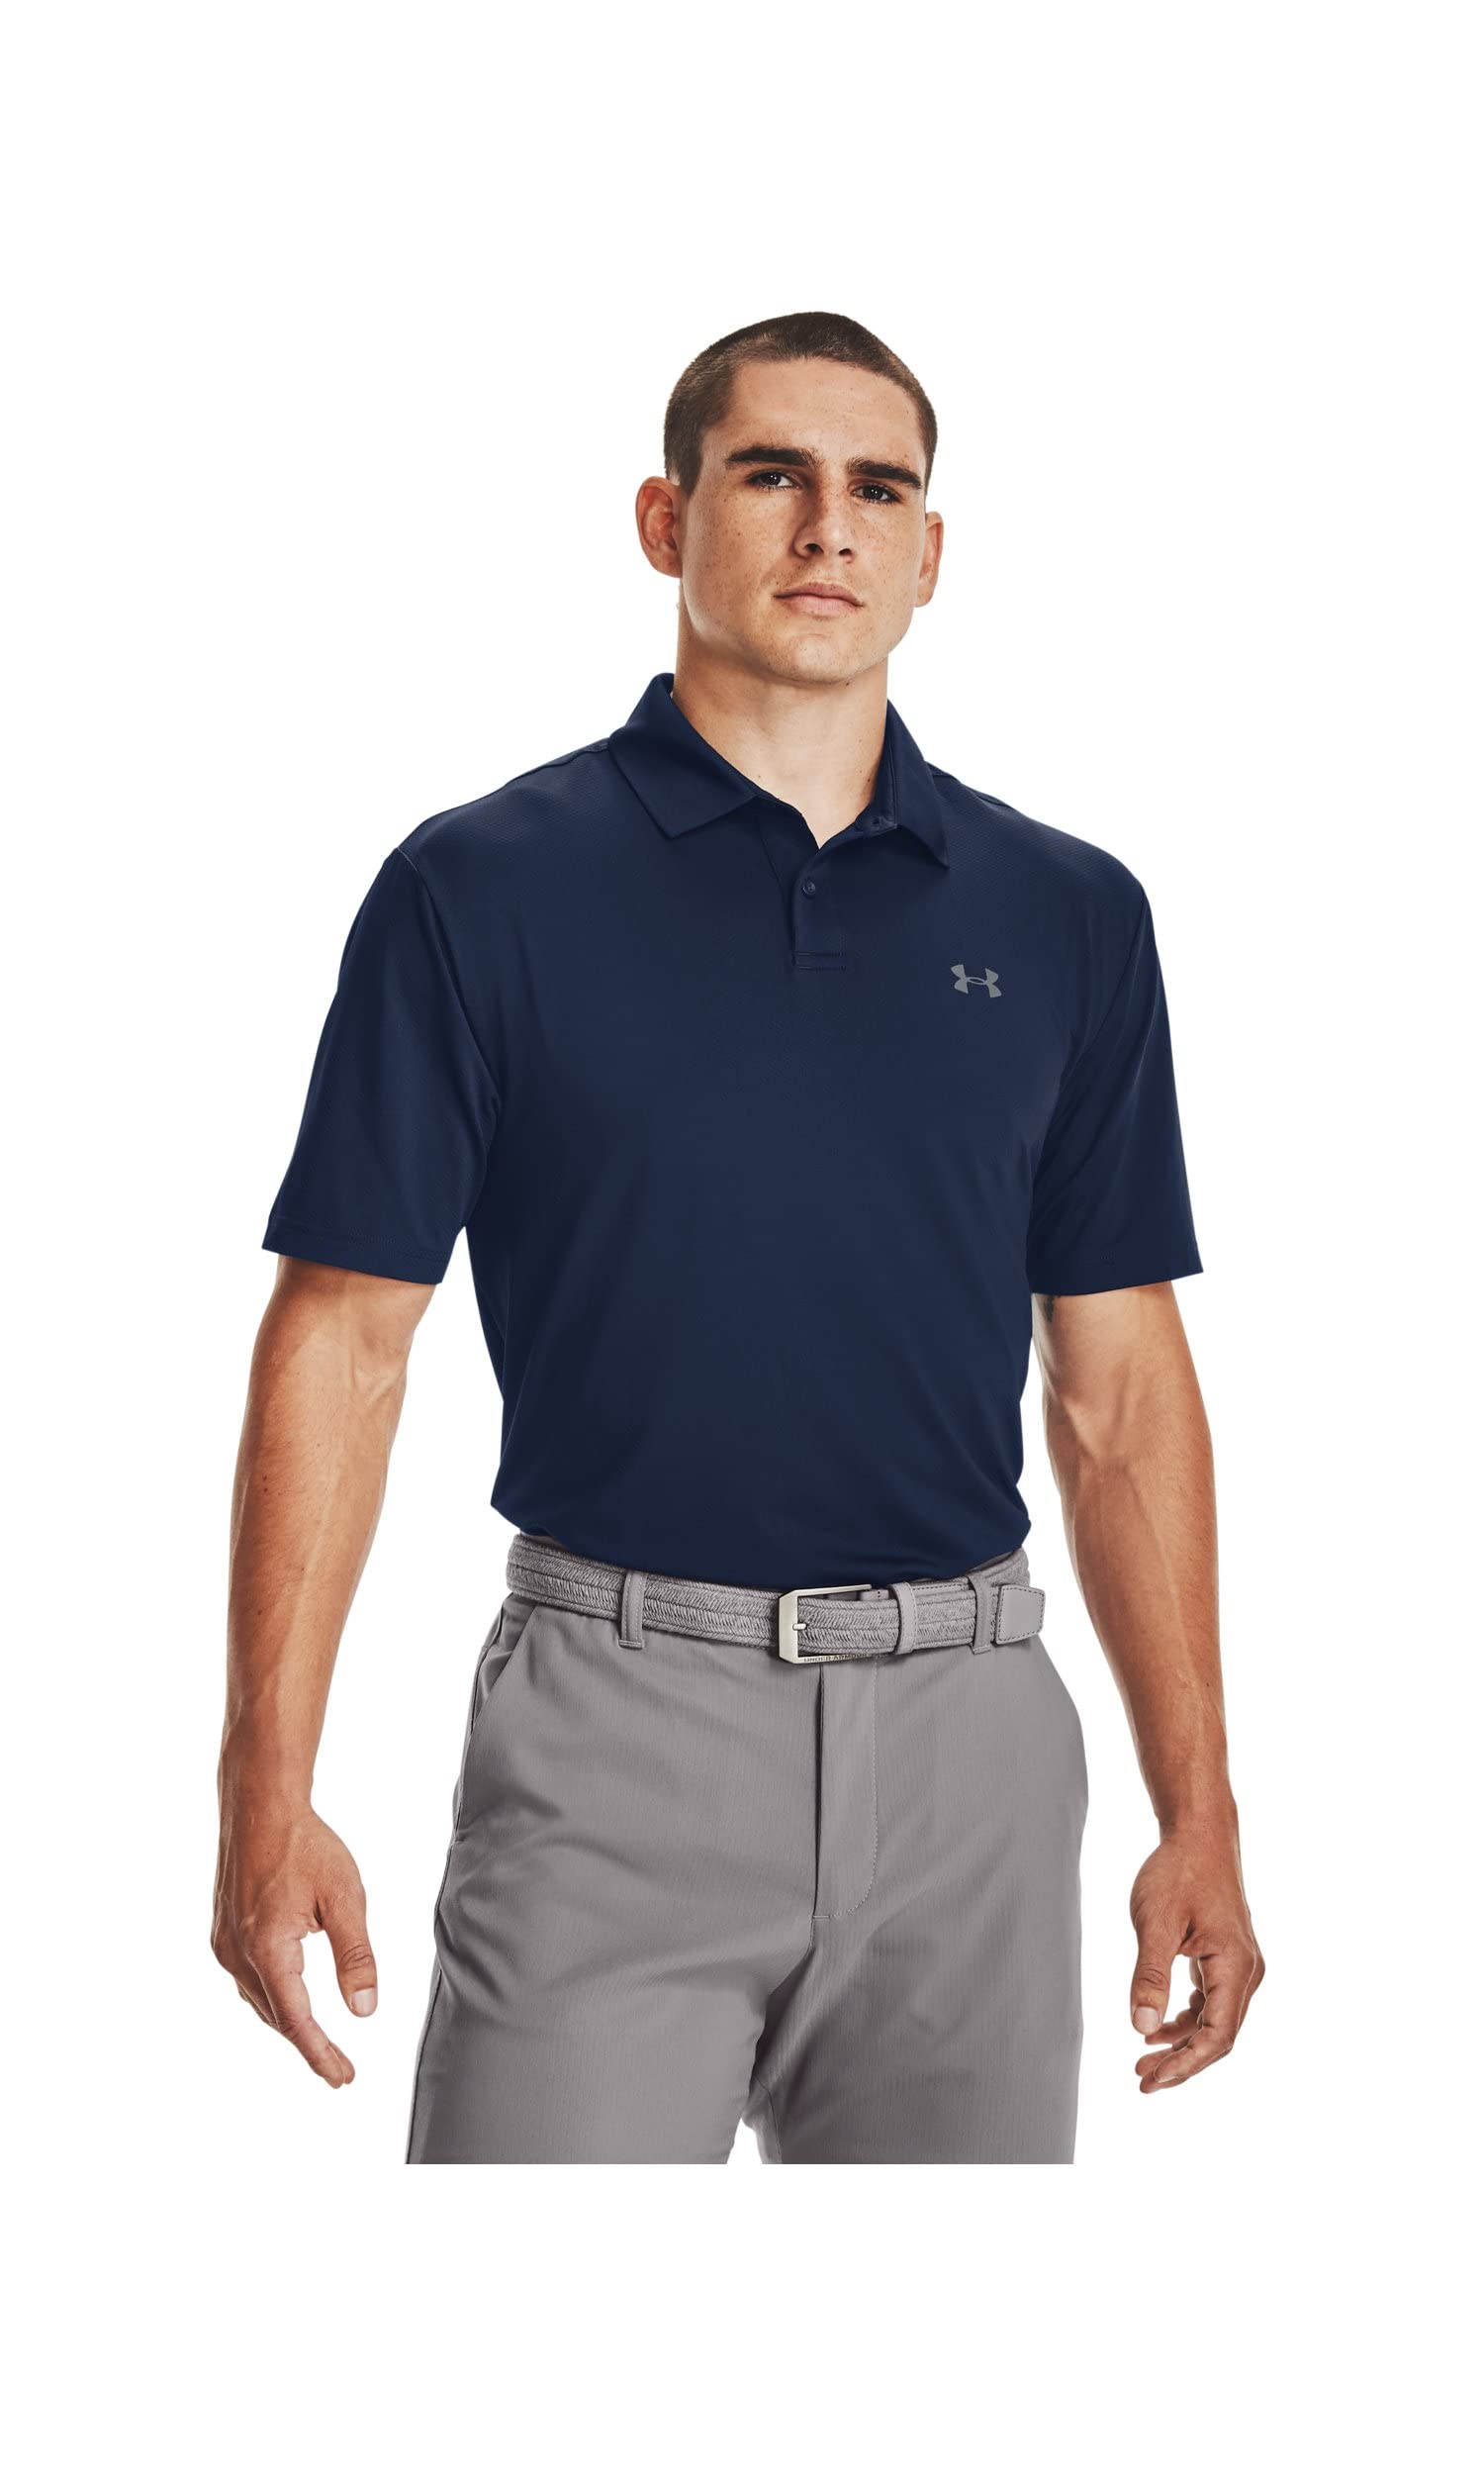 Under Armour UA Performance Textured Men's 2.0 Golf Polo Shirt (3XLT - Academy Blue) $25.10 + Free Shipping w/ Prime or on $35+